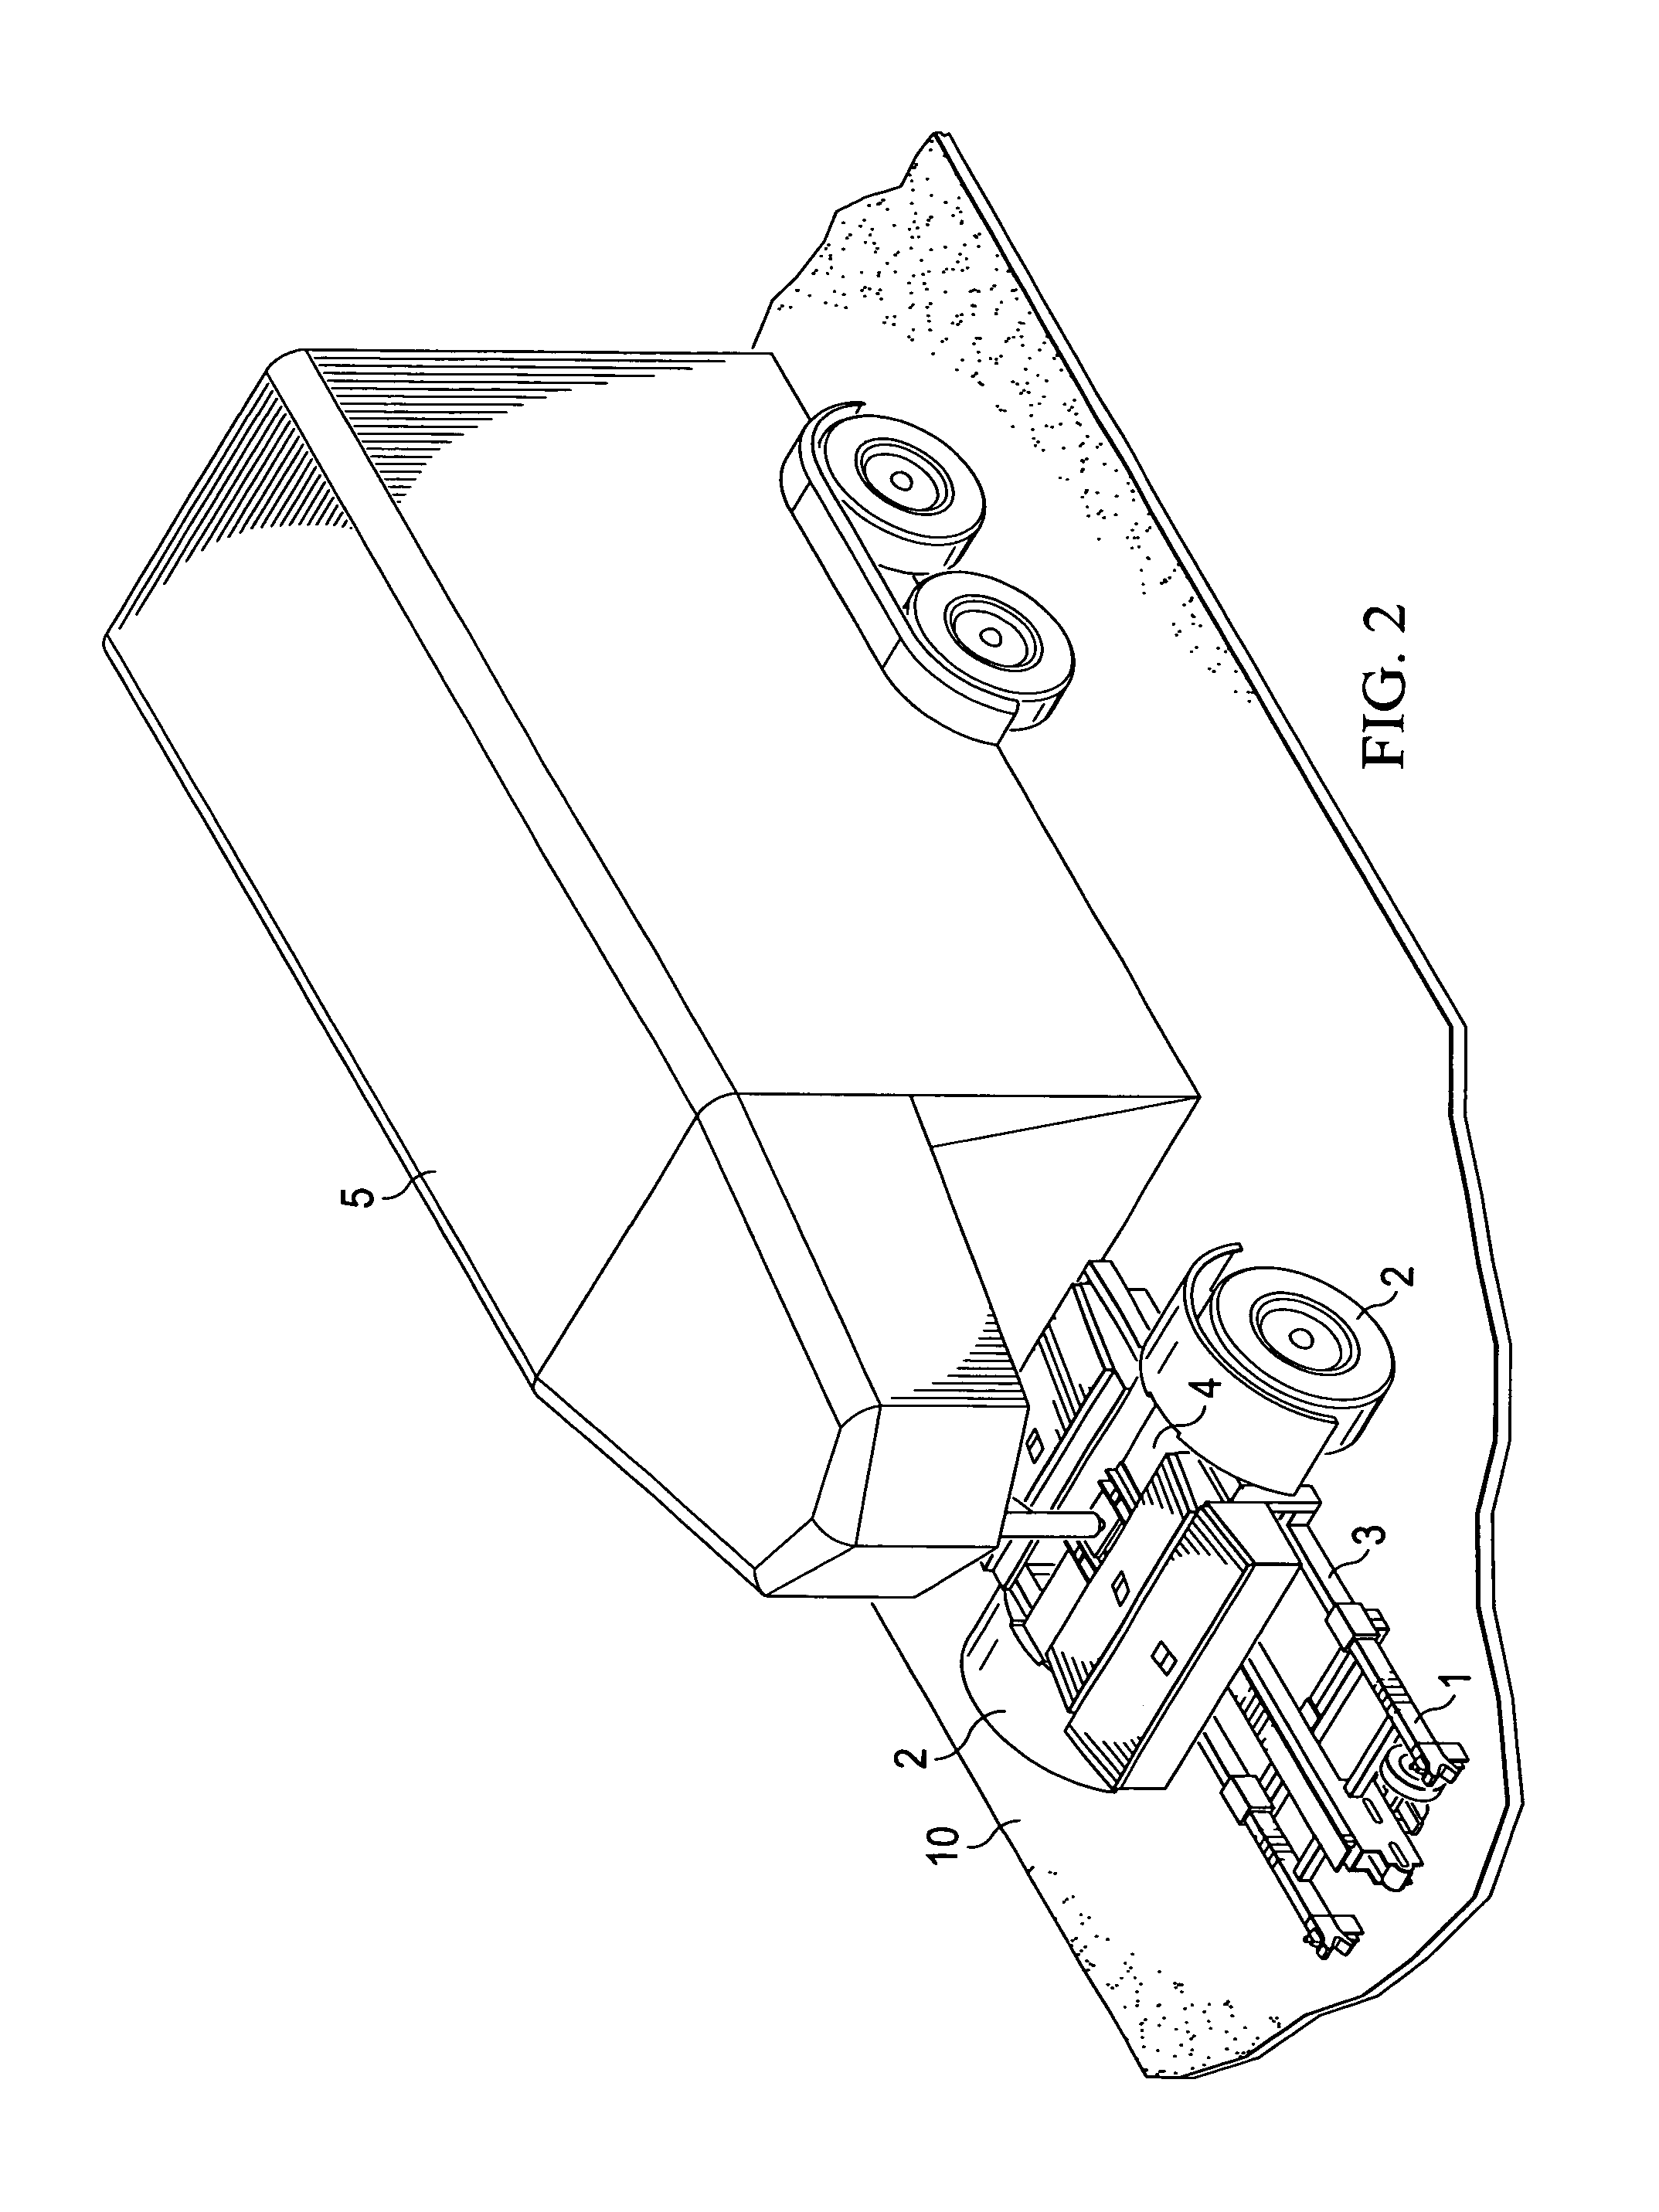 Automated axle steering control system